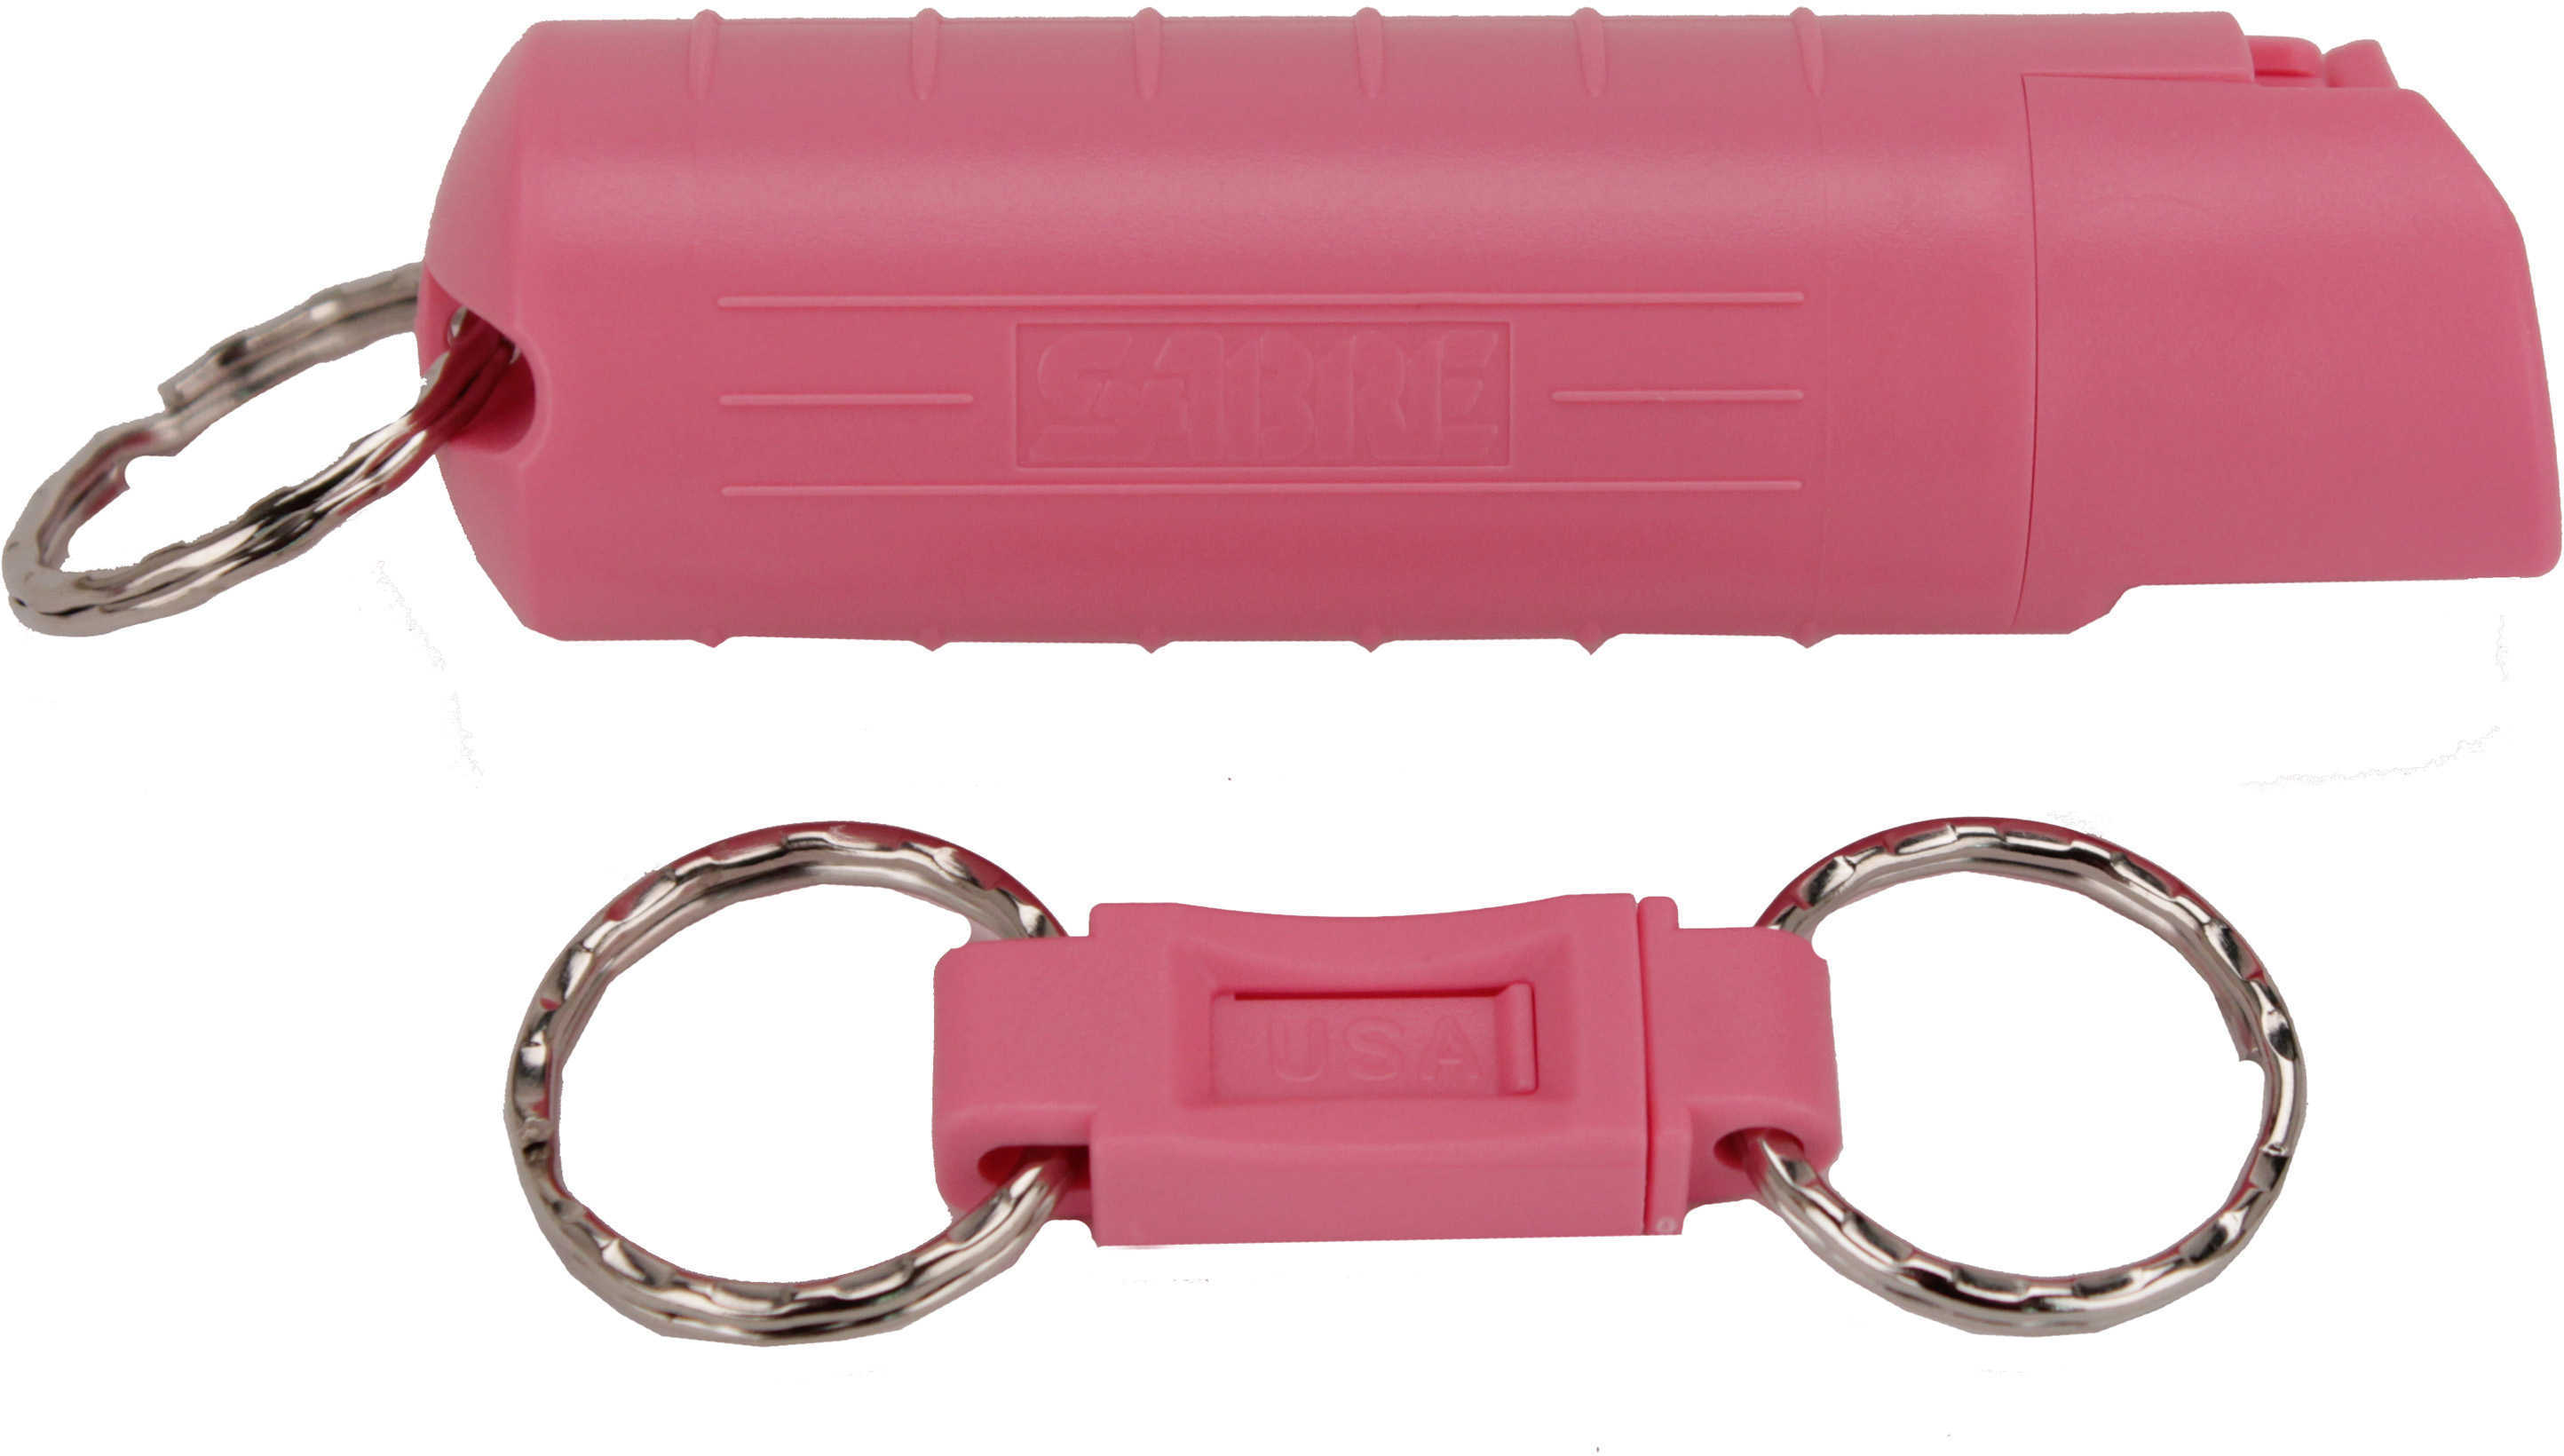 Sabre Red NBCF Key Case Pepper Spray Pink Hardcase with Quick Release Key Ring Model: HC-NBCF-01